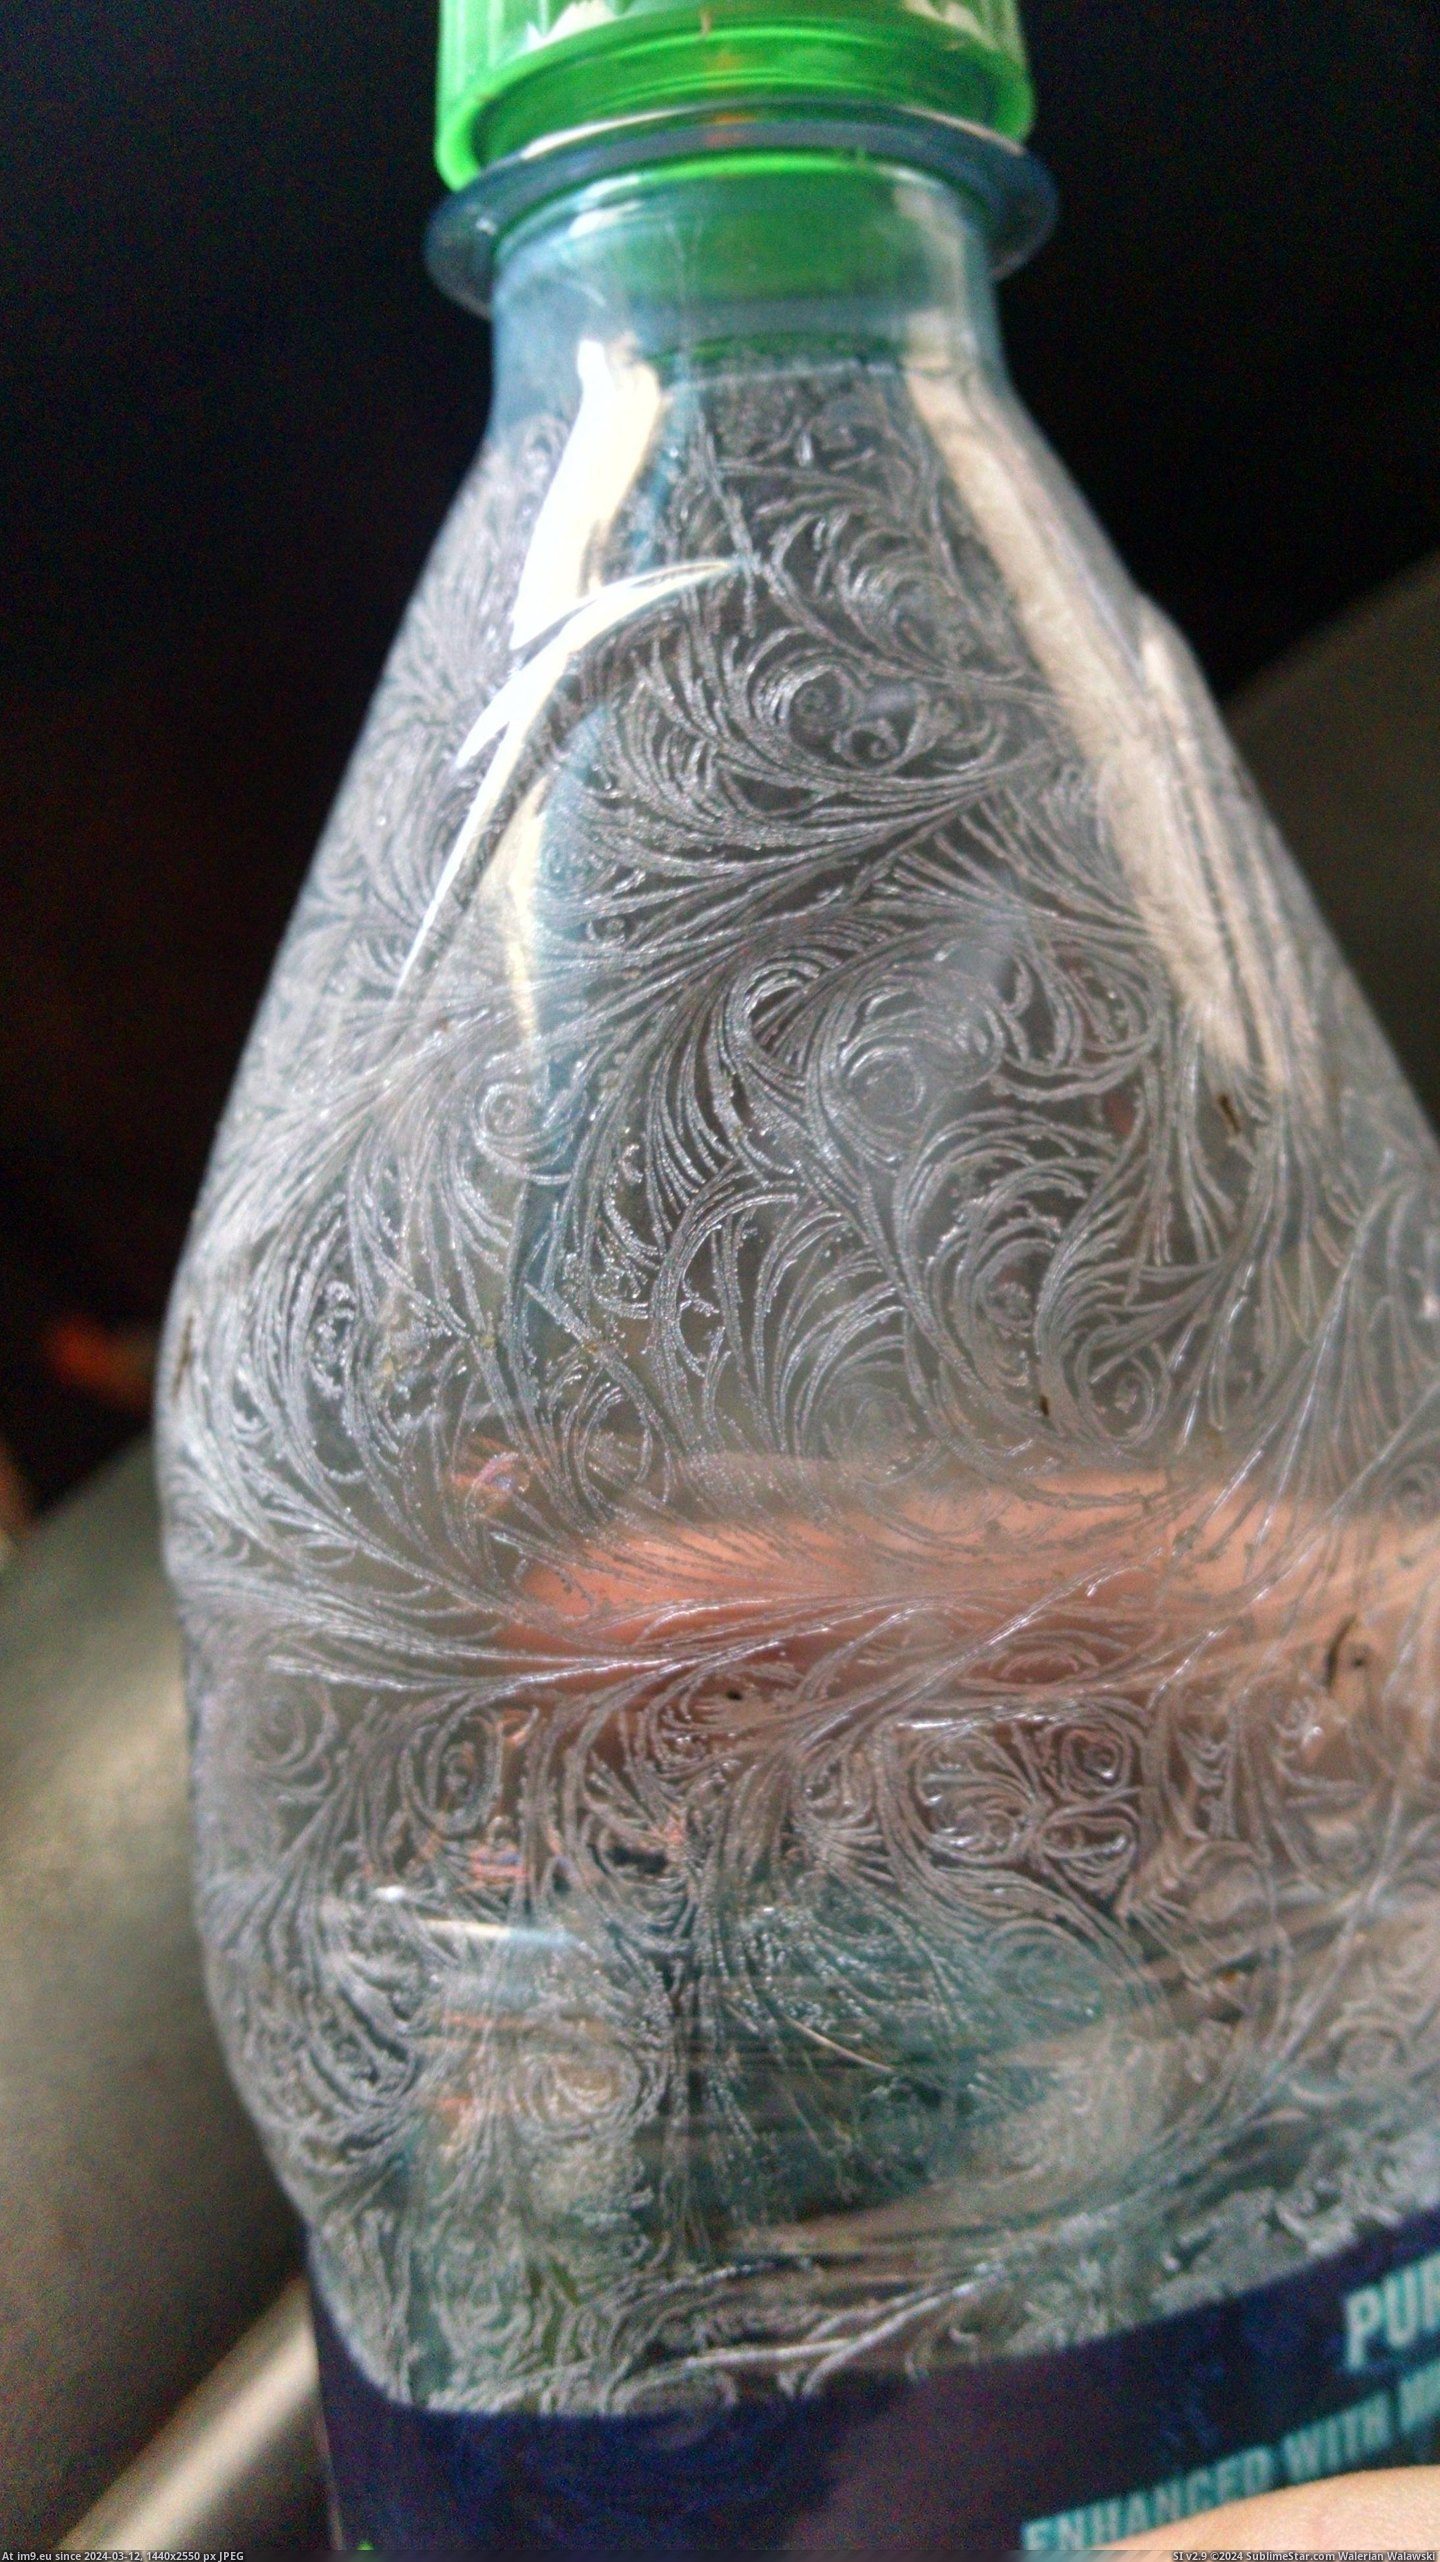 #Design #Night #Water #Bottle #Truck #Left #Ice #Natural [Pics] I left a water bottle in my truck over night this is the natural ice design on the inside Pic. (Image of album My r/PICS favs))